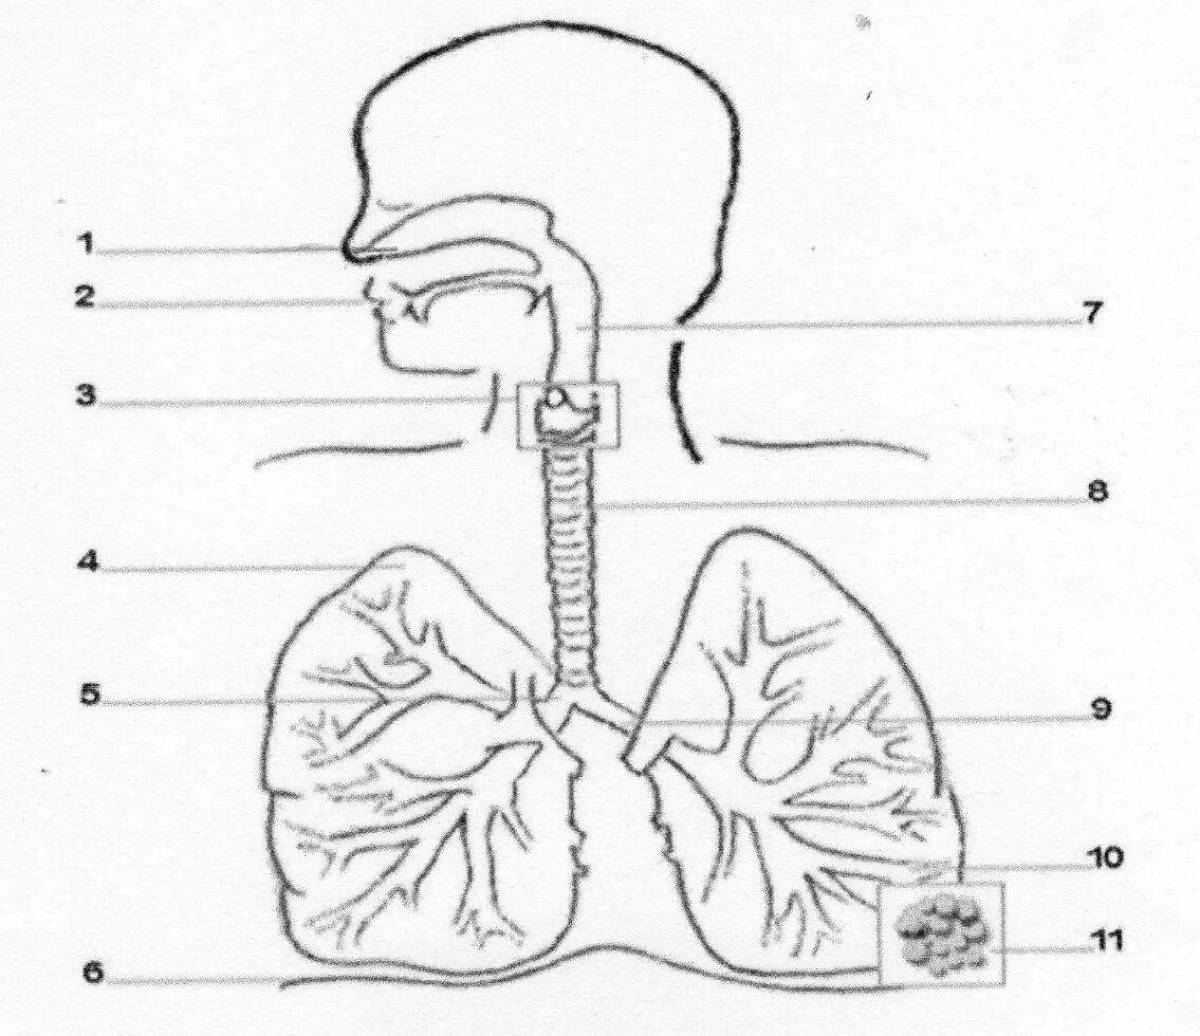 Interesting coloring page of the respiratory system